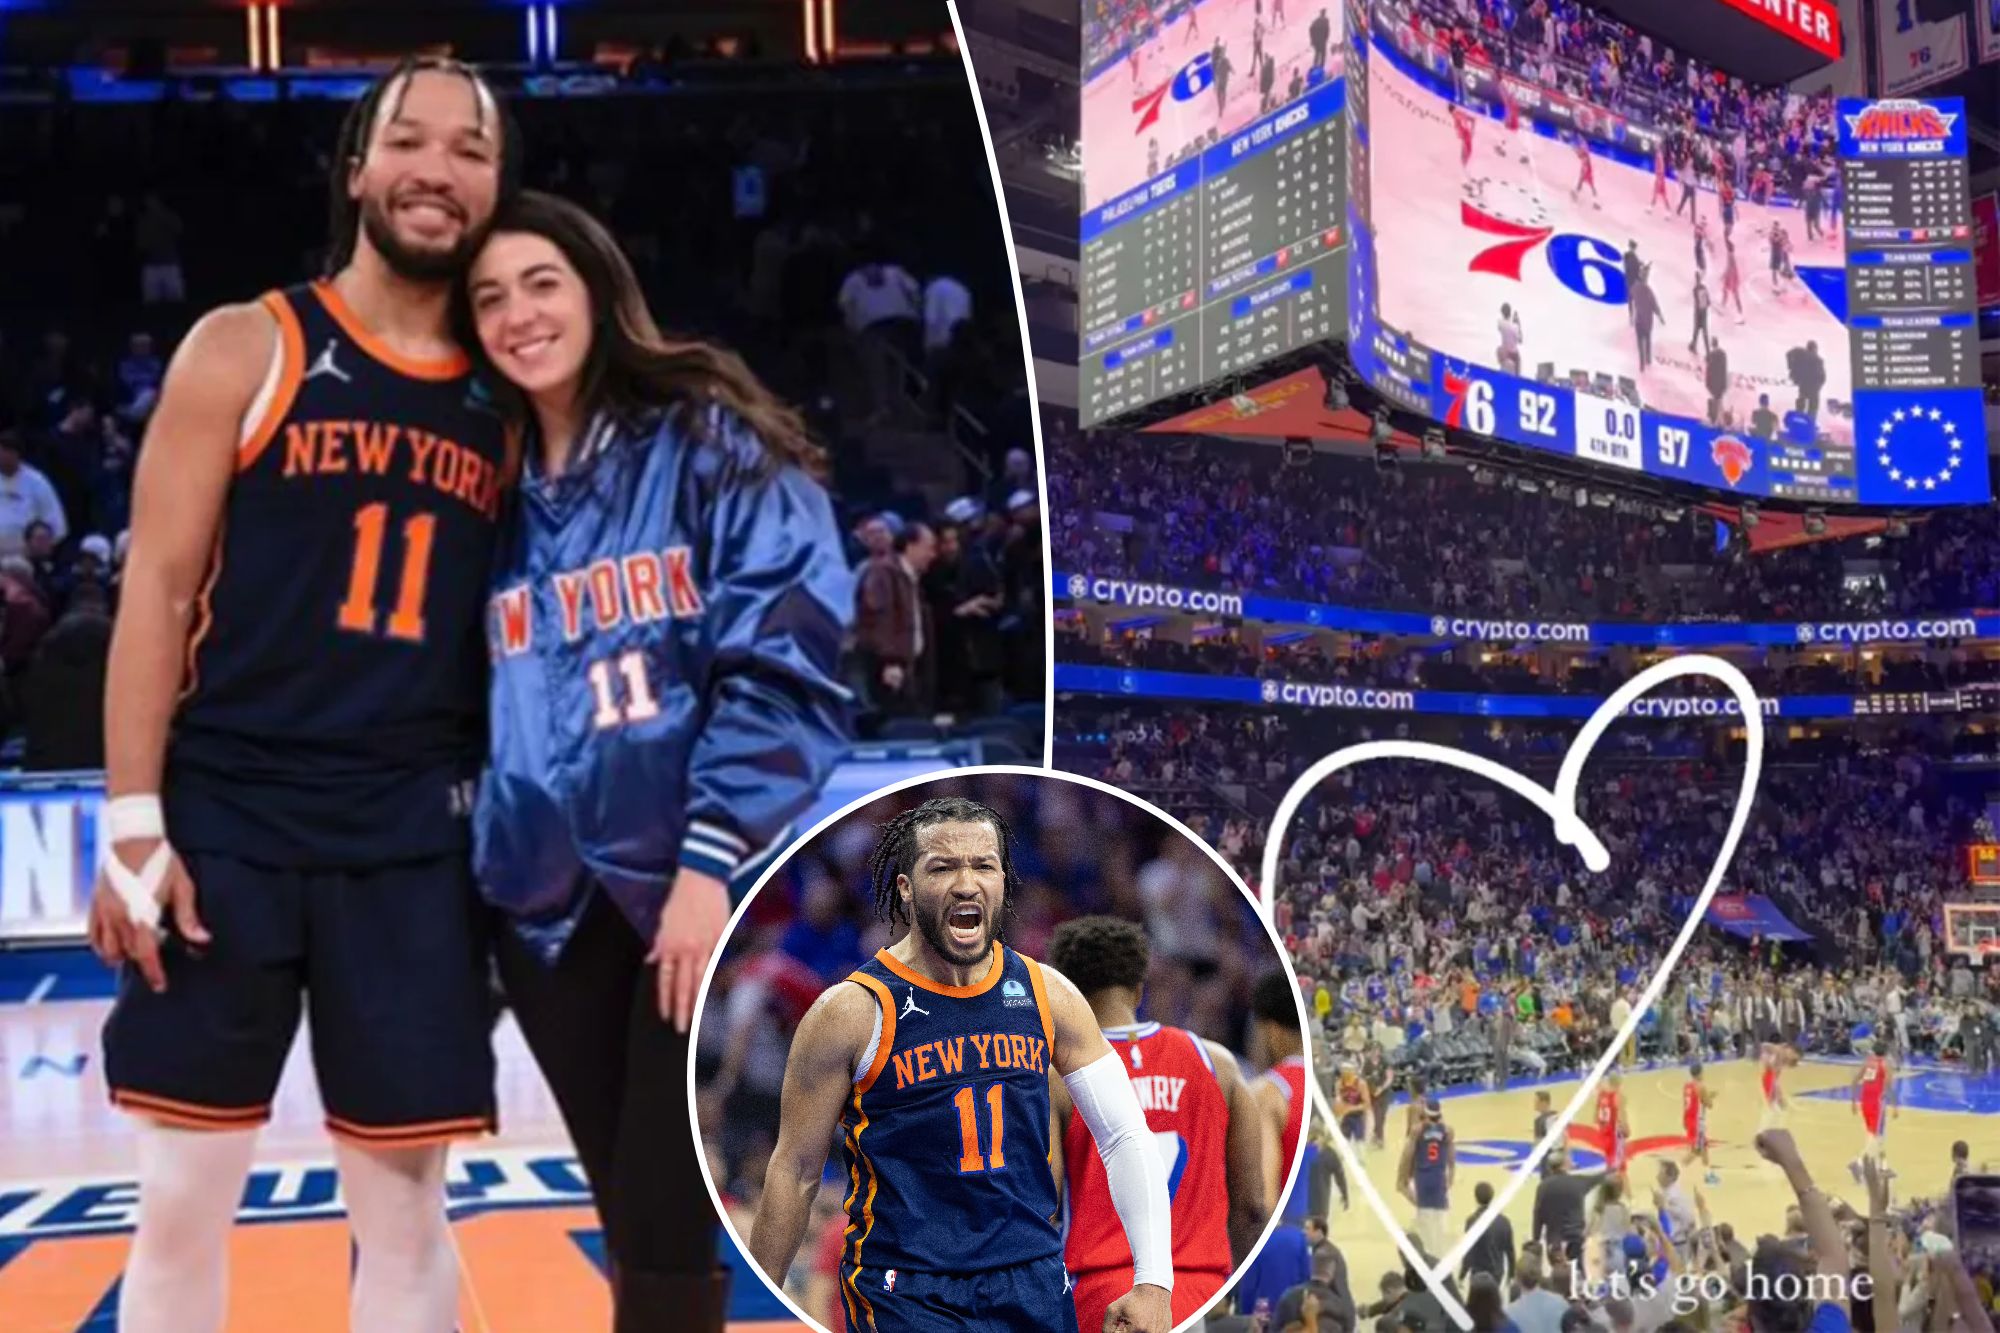 Jalen Brunson's wife Ali Marks is ready to get back to The Garden after the Knicks took a 3-1 series lead in Game 4 of their first-round playoff series against the Sixers Sunday.